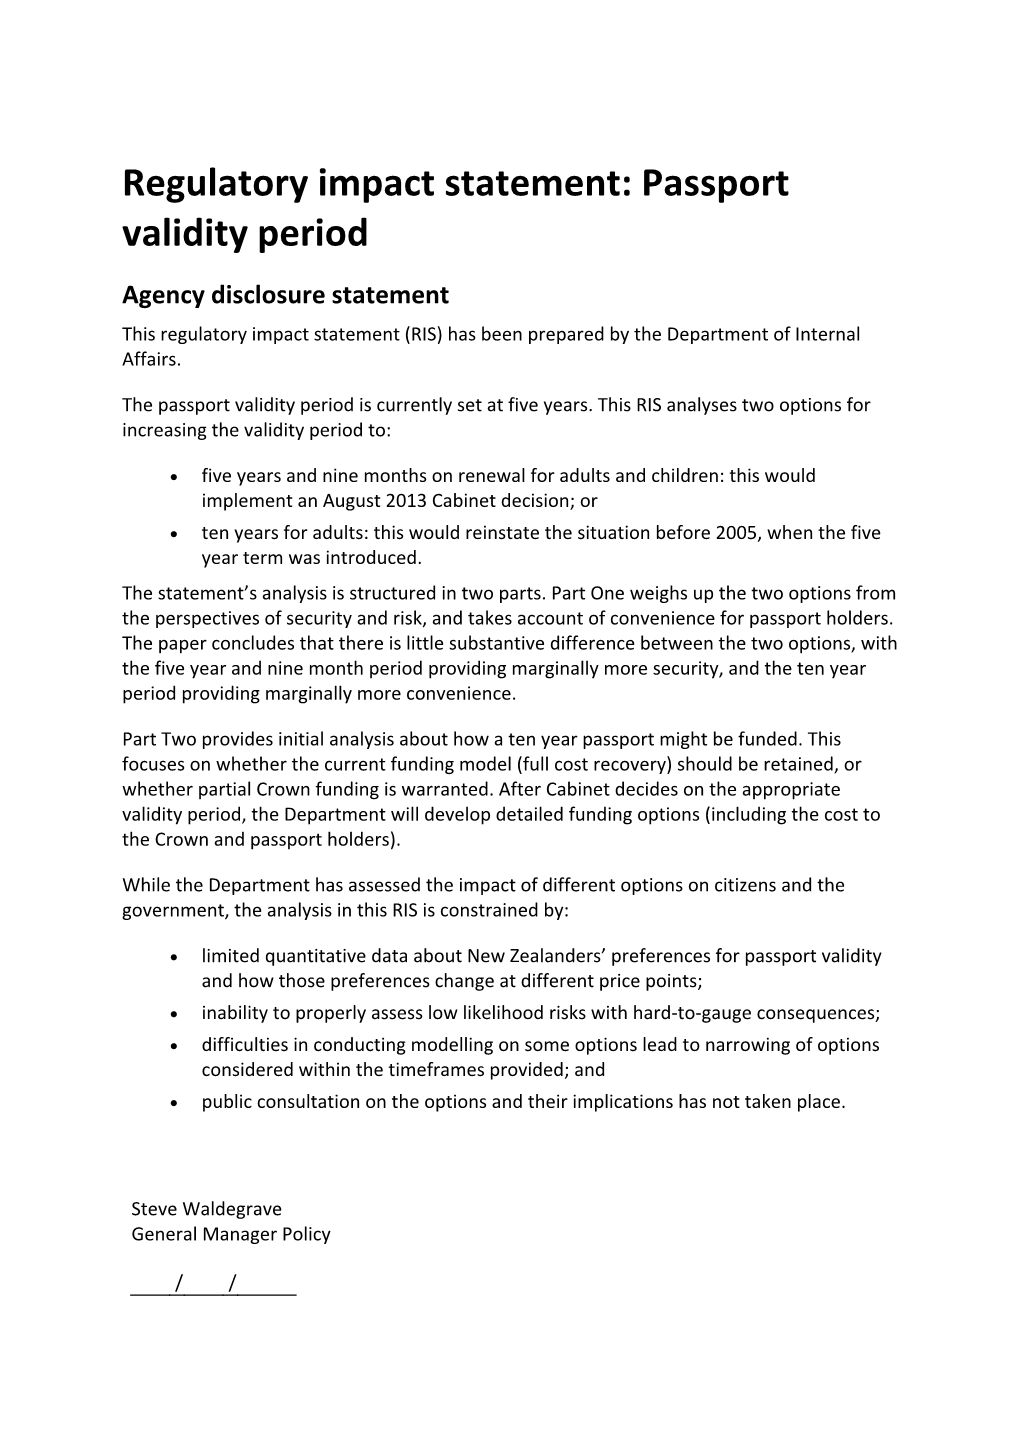 Passport Validity Period Agency Disclosure Statement This Regulatory Impact Statement (RIS) Has Been Prepared by the Department of Internal Affairs